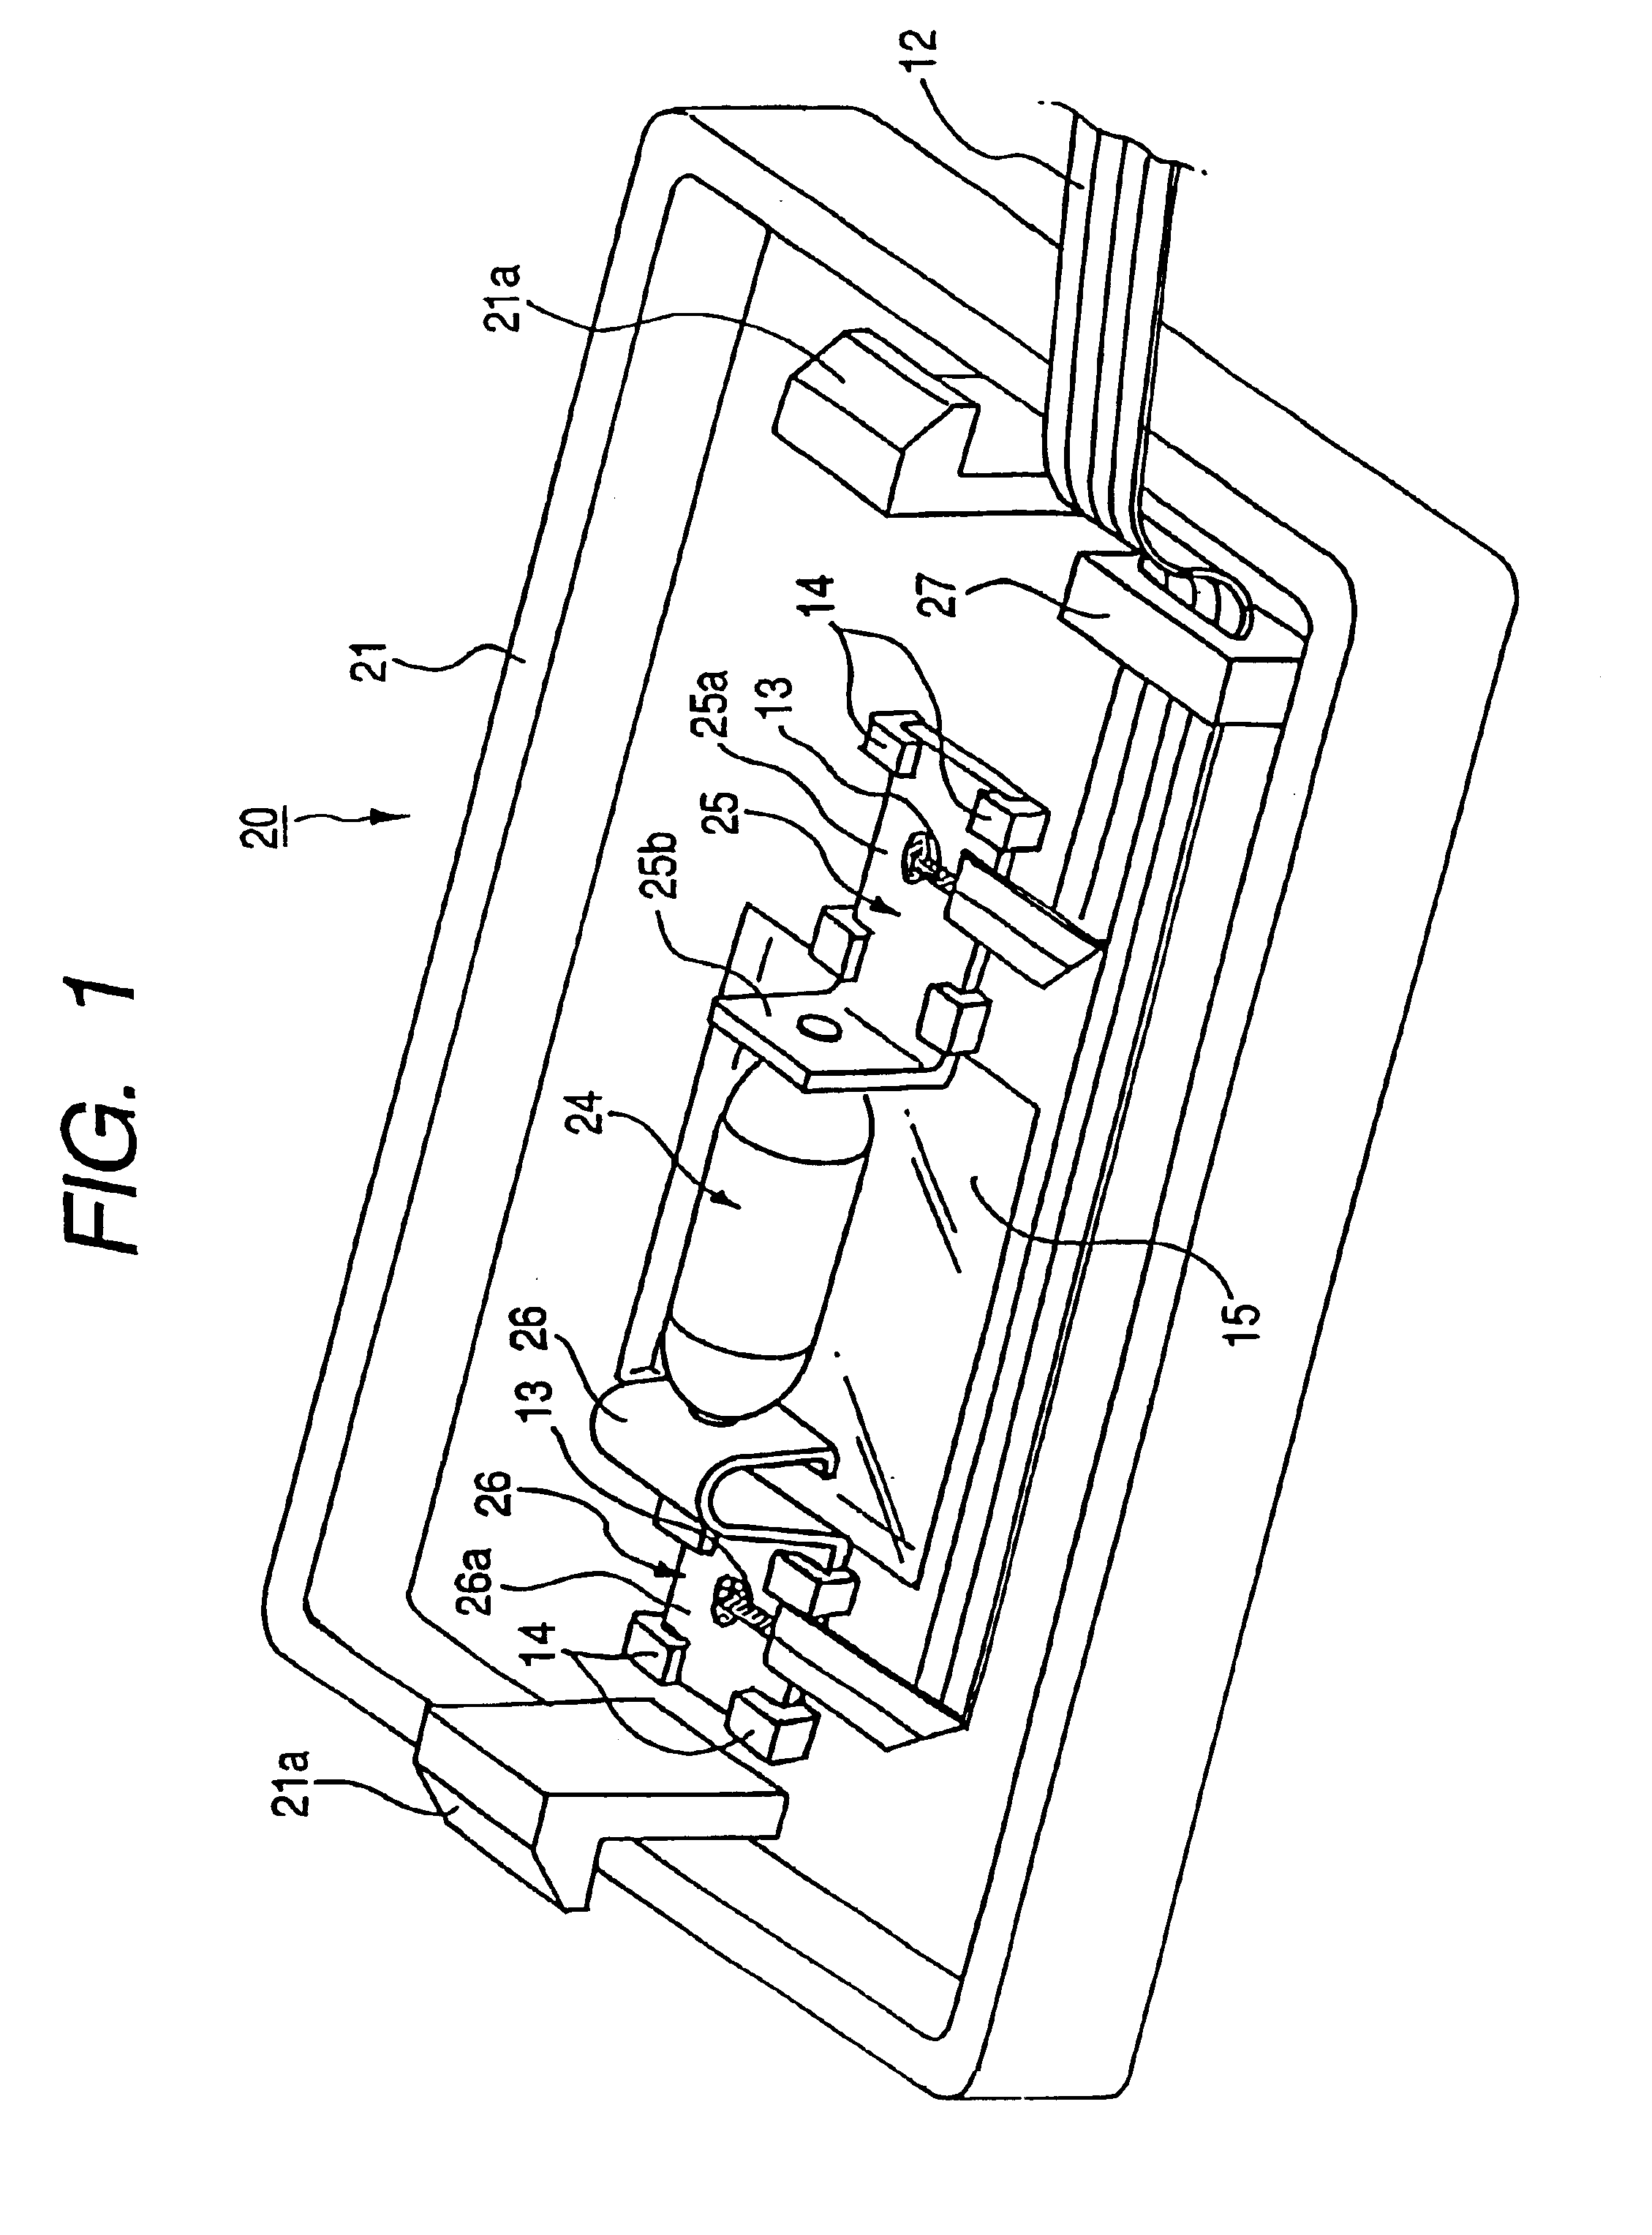 Lamp unit assembling method and lamp unit mounting structure